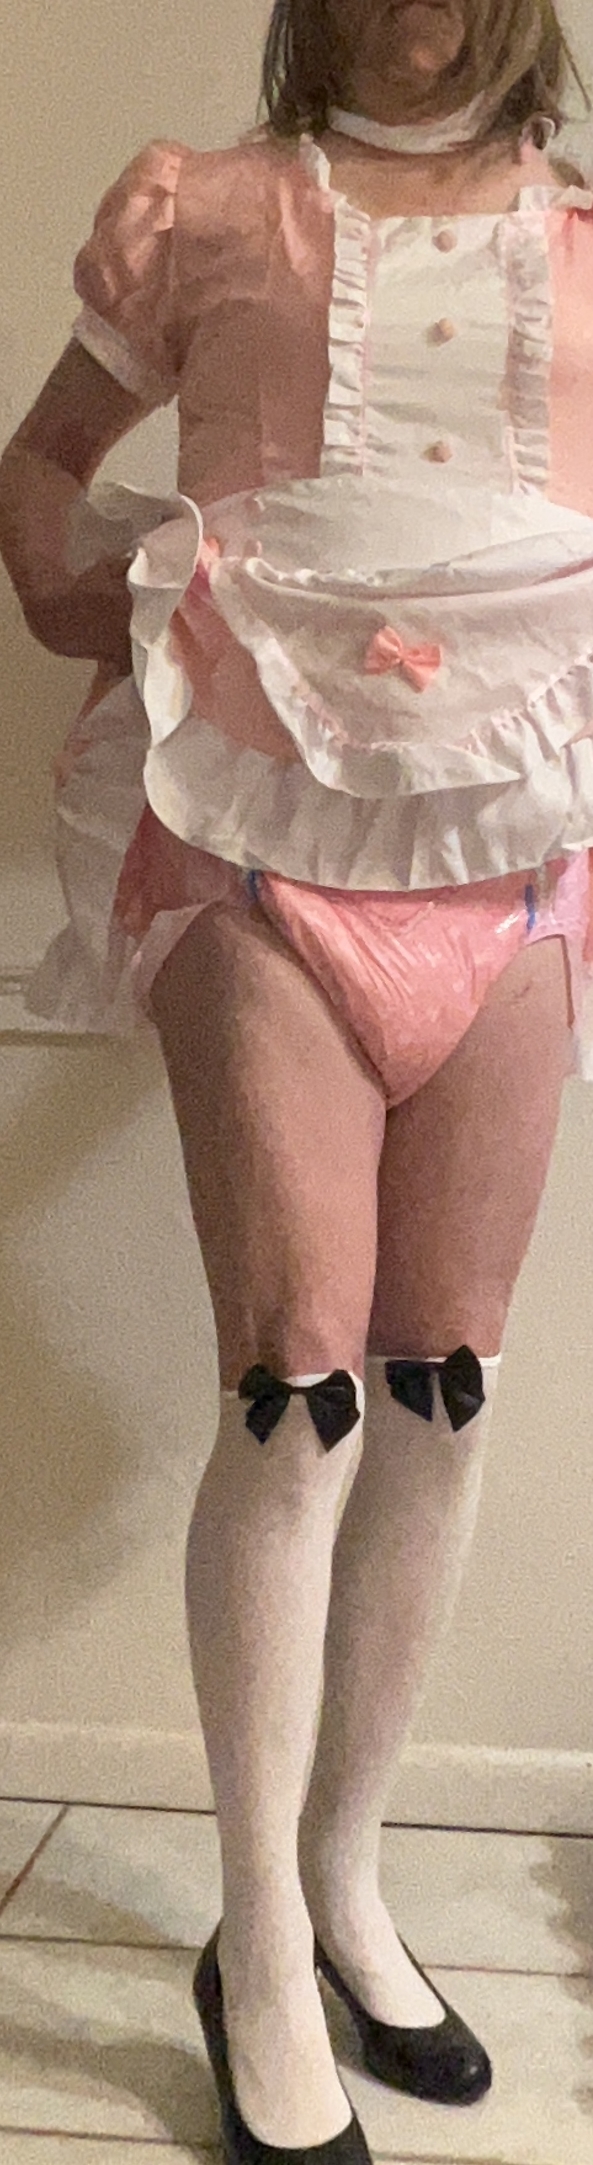 Sissy maid morning chores - Me had to do chores in my new maid dress before mistress changed me and I really hopped I got done before I messed my diaper, Sissy maid,diaper change , Adult Babies,Feminization,Dominating Mistress Or Master,Sissy Fashion,Diaper Lovers